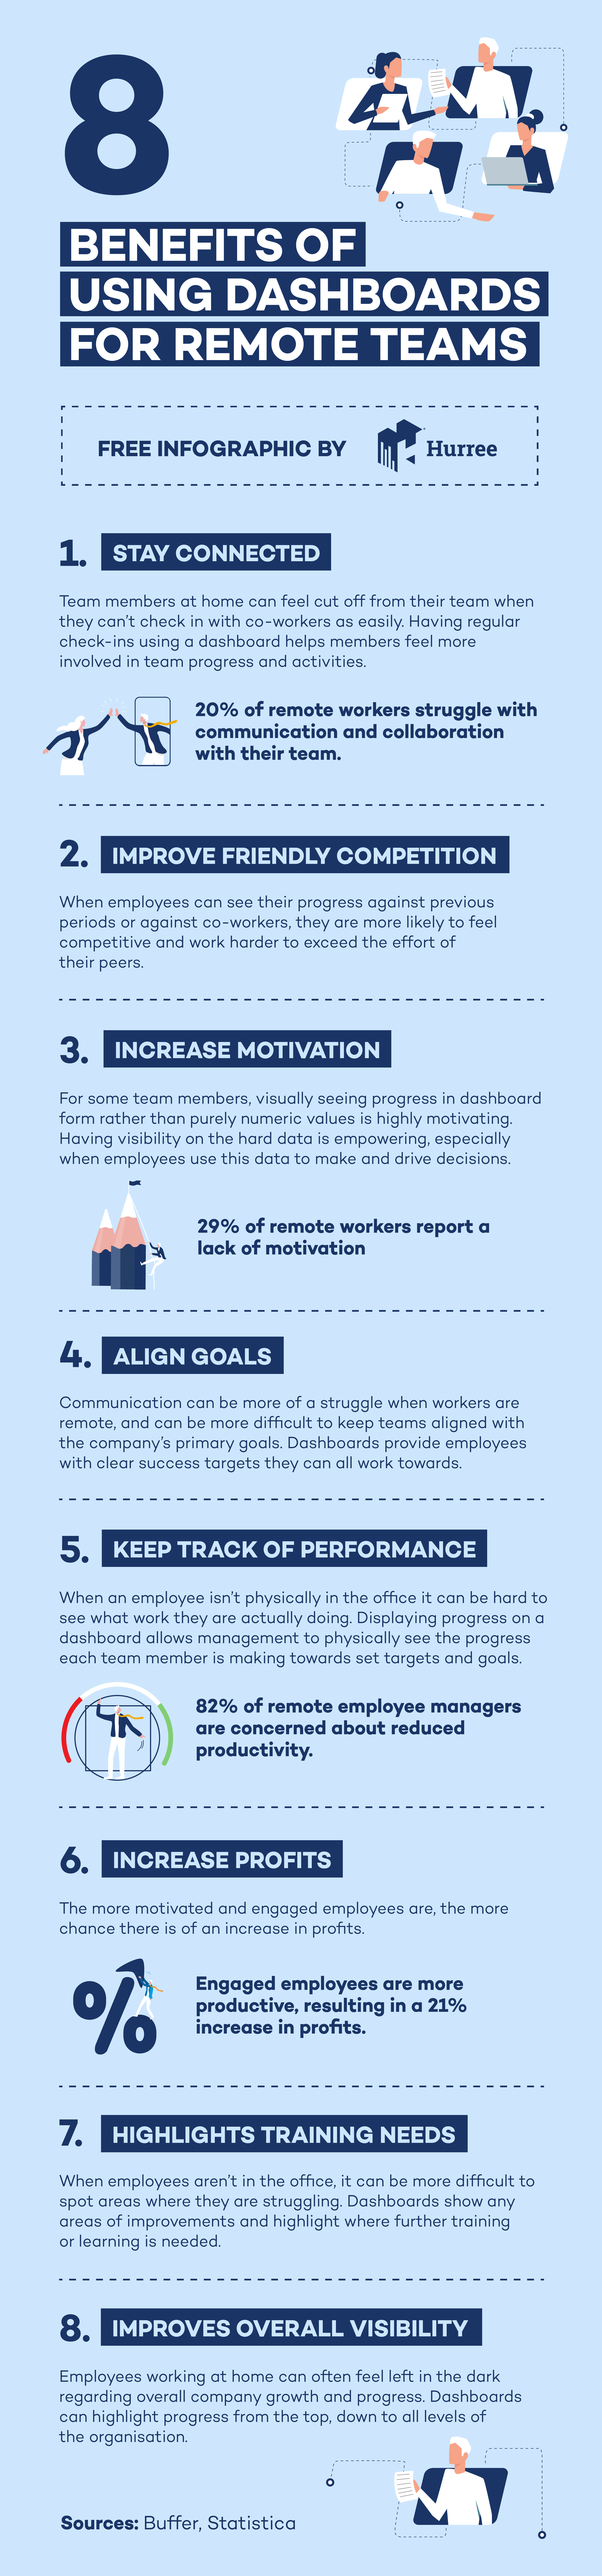 8 benefits of using dashboards for remote teams